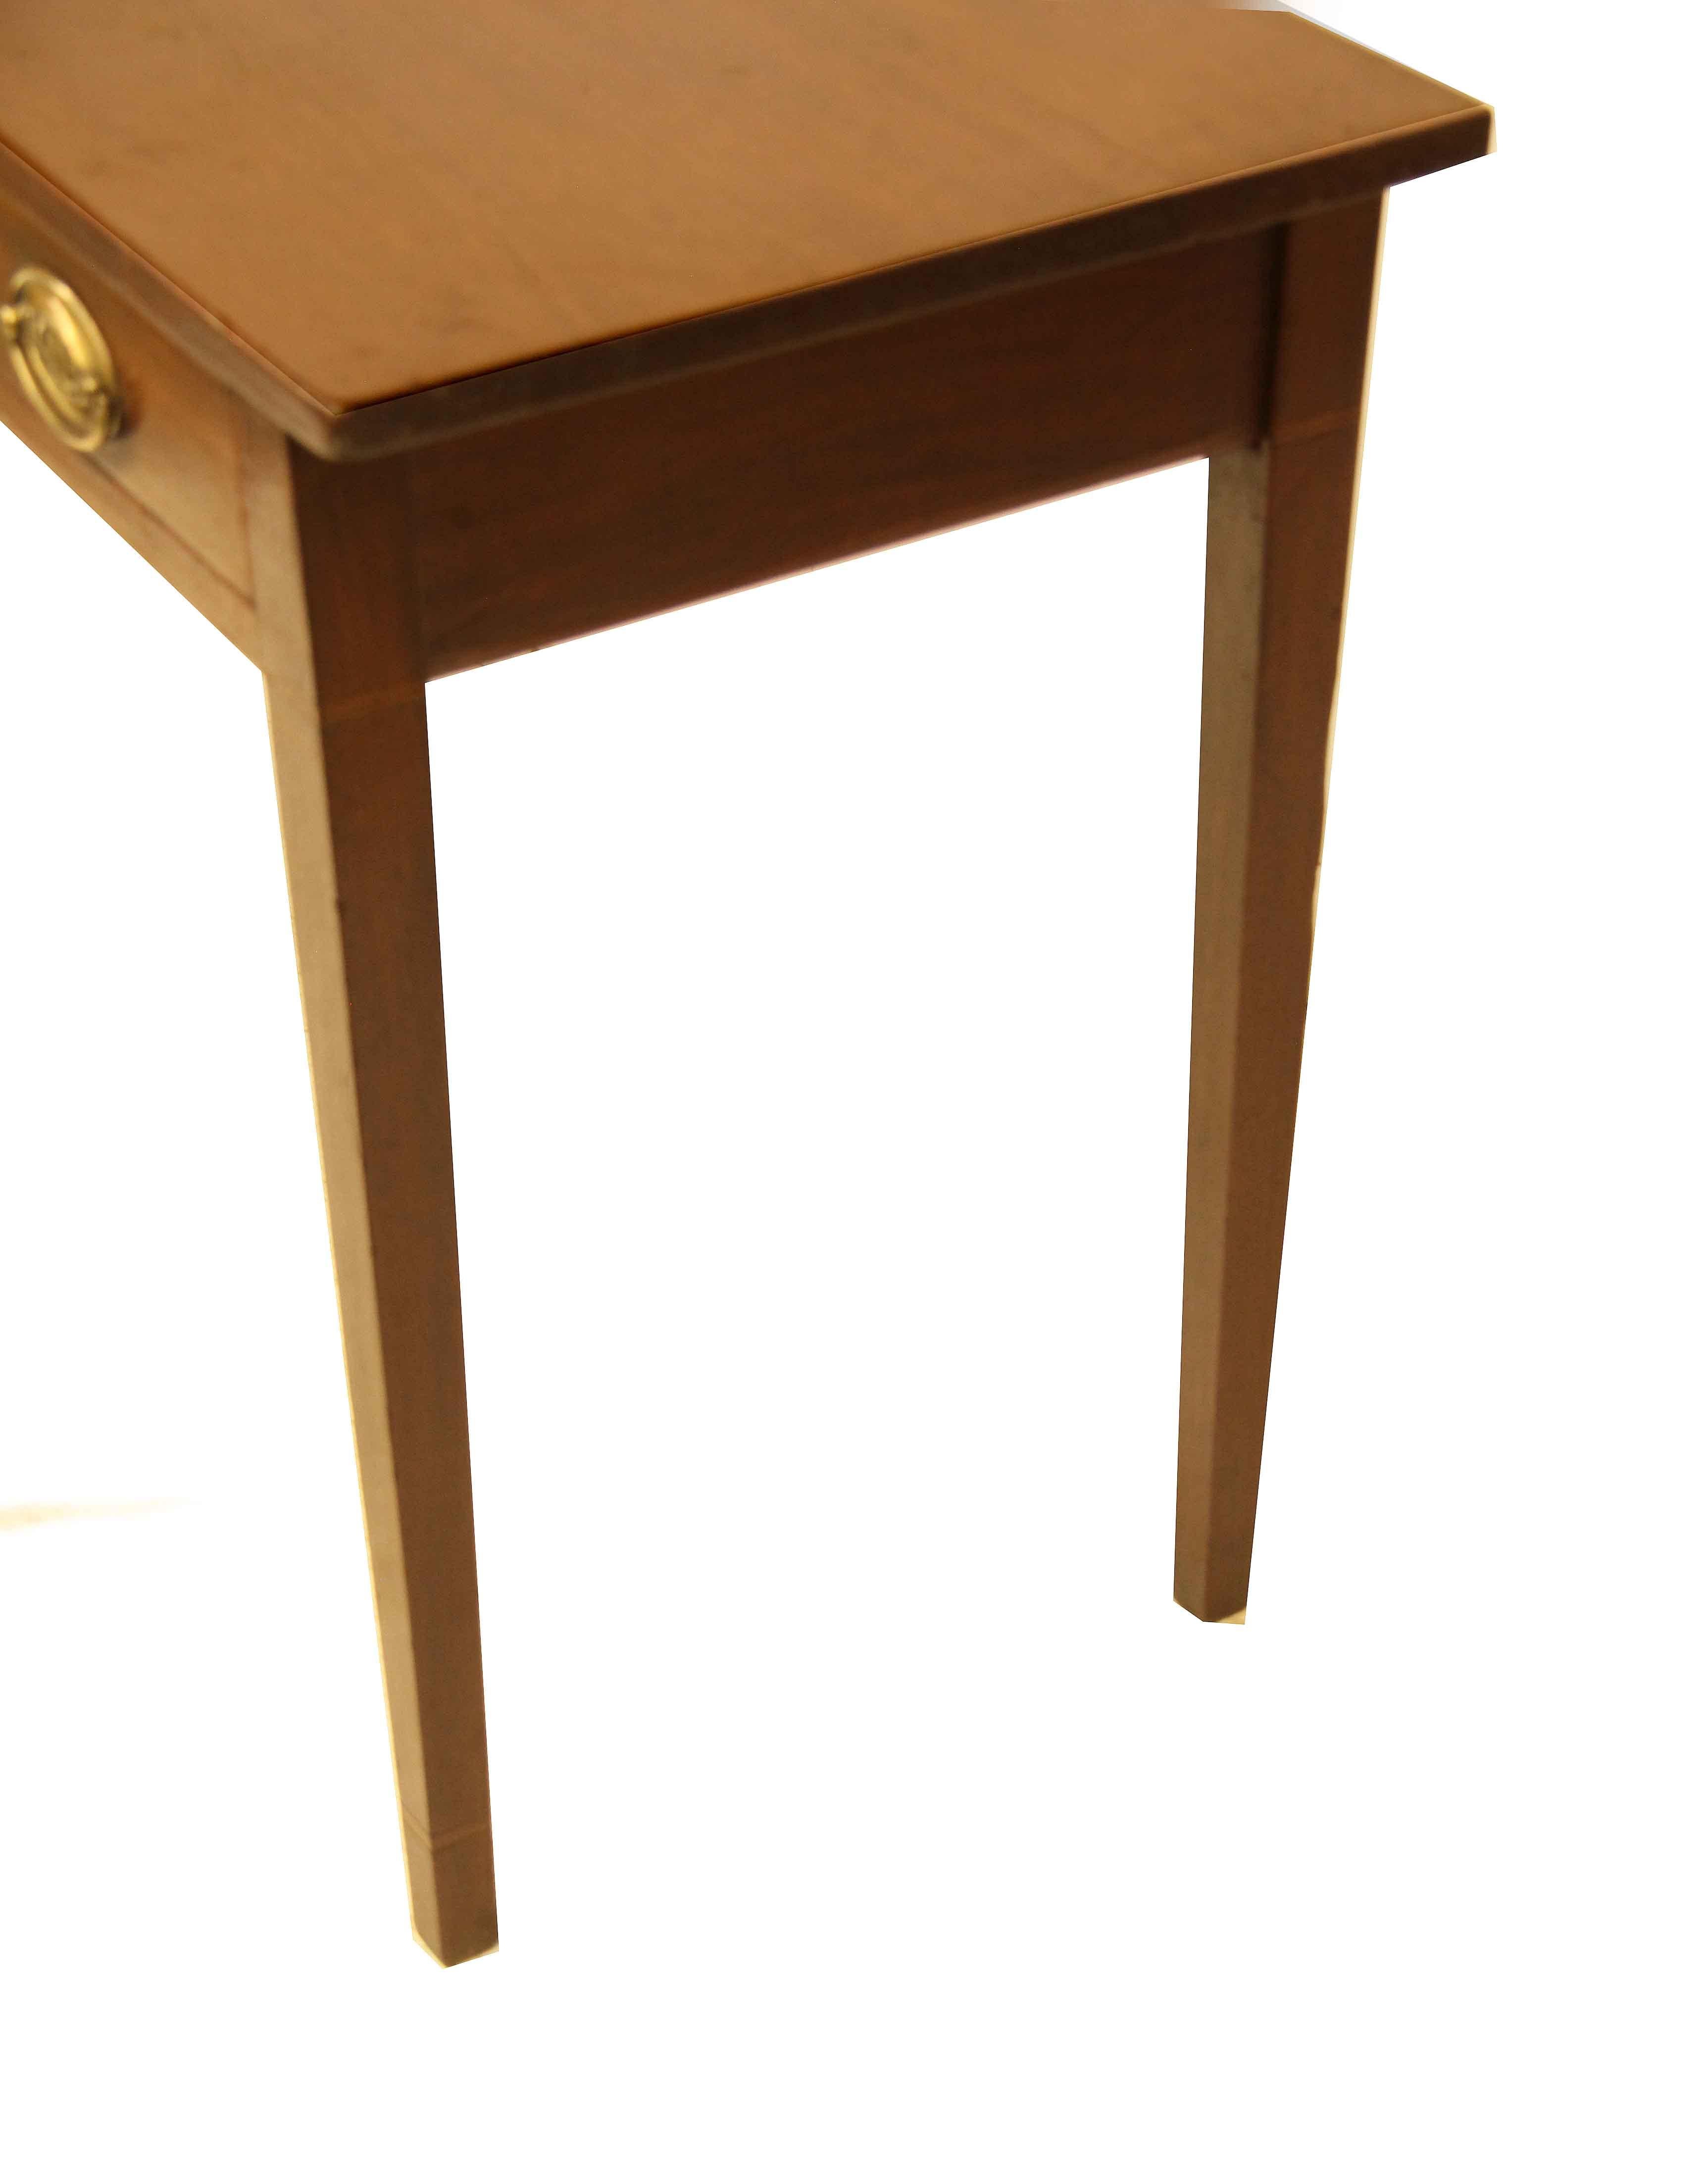 English Hepplewhite Inlaid Side Table For Sale